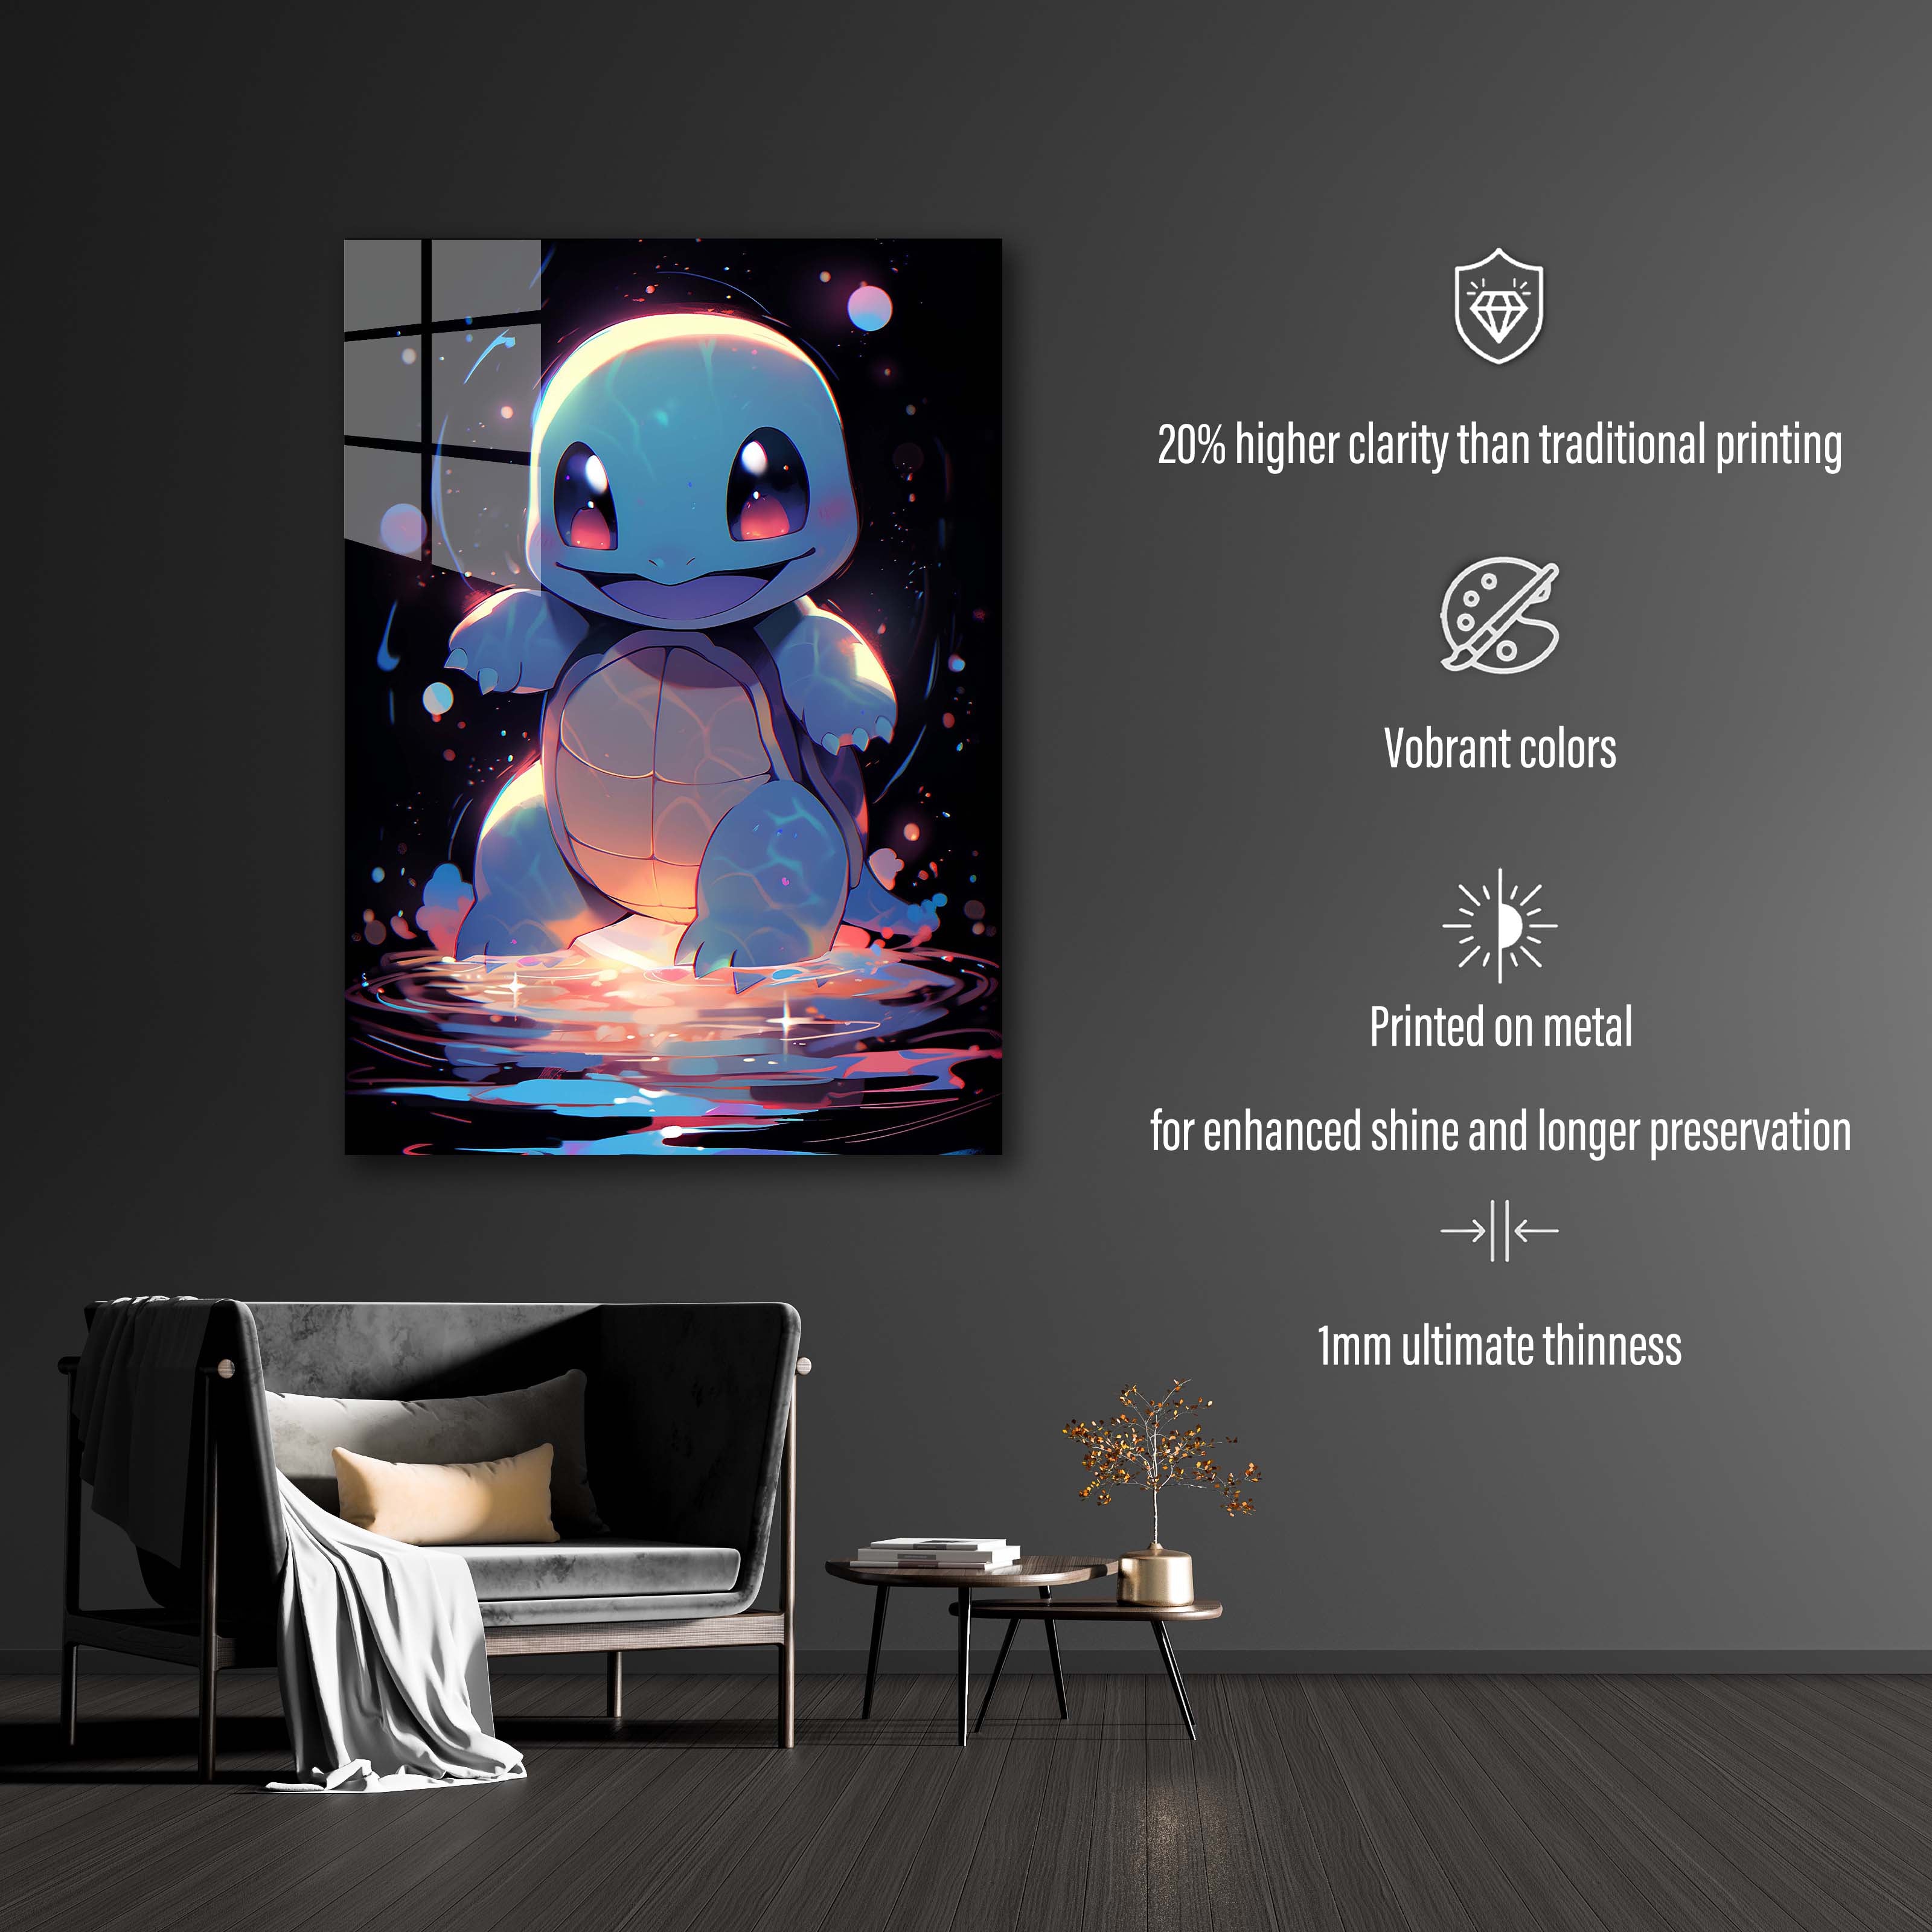 Squirtle-Artwork by @Artfinity